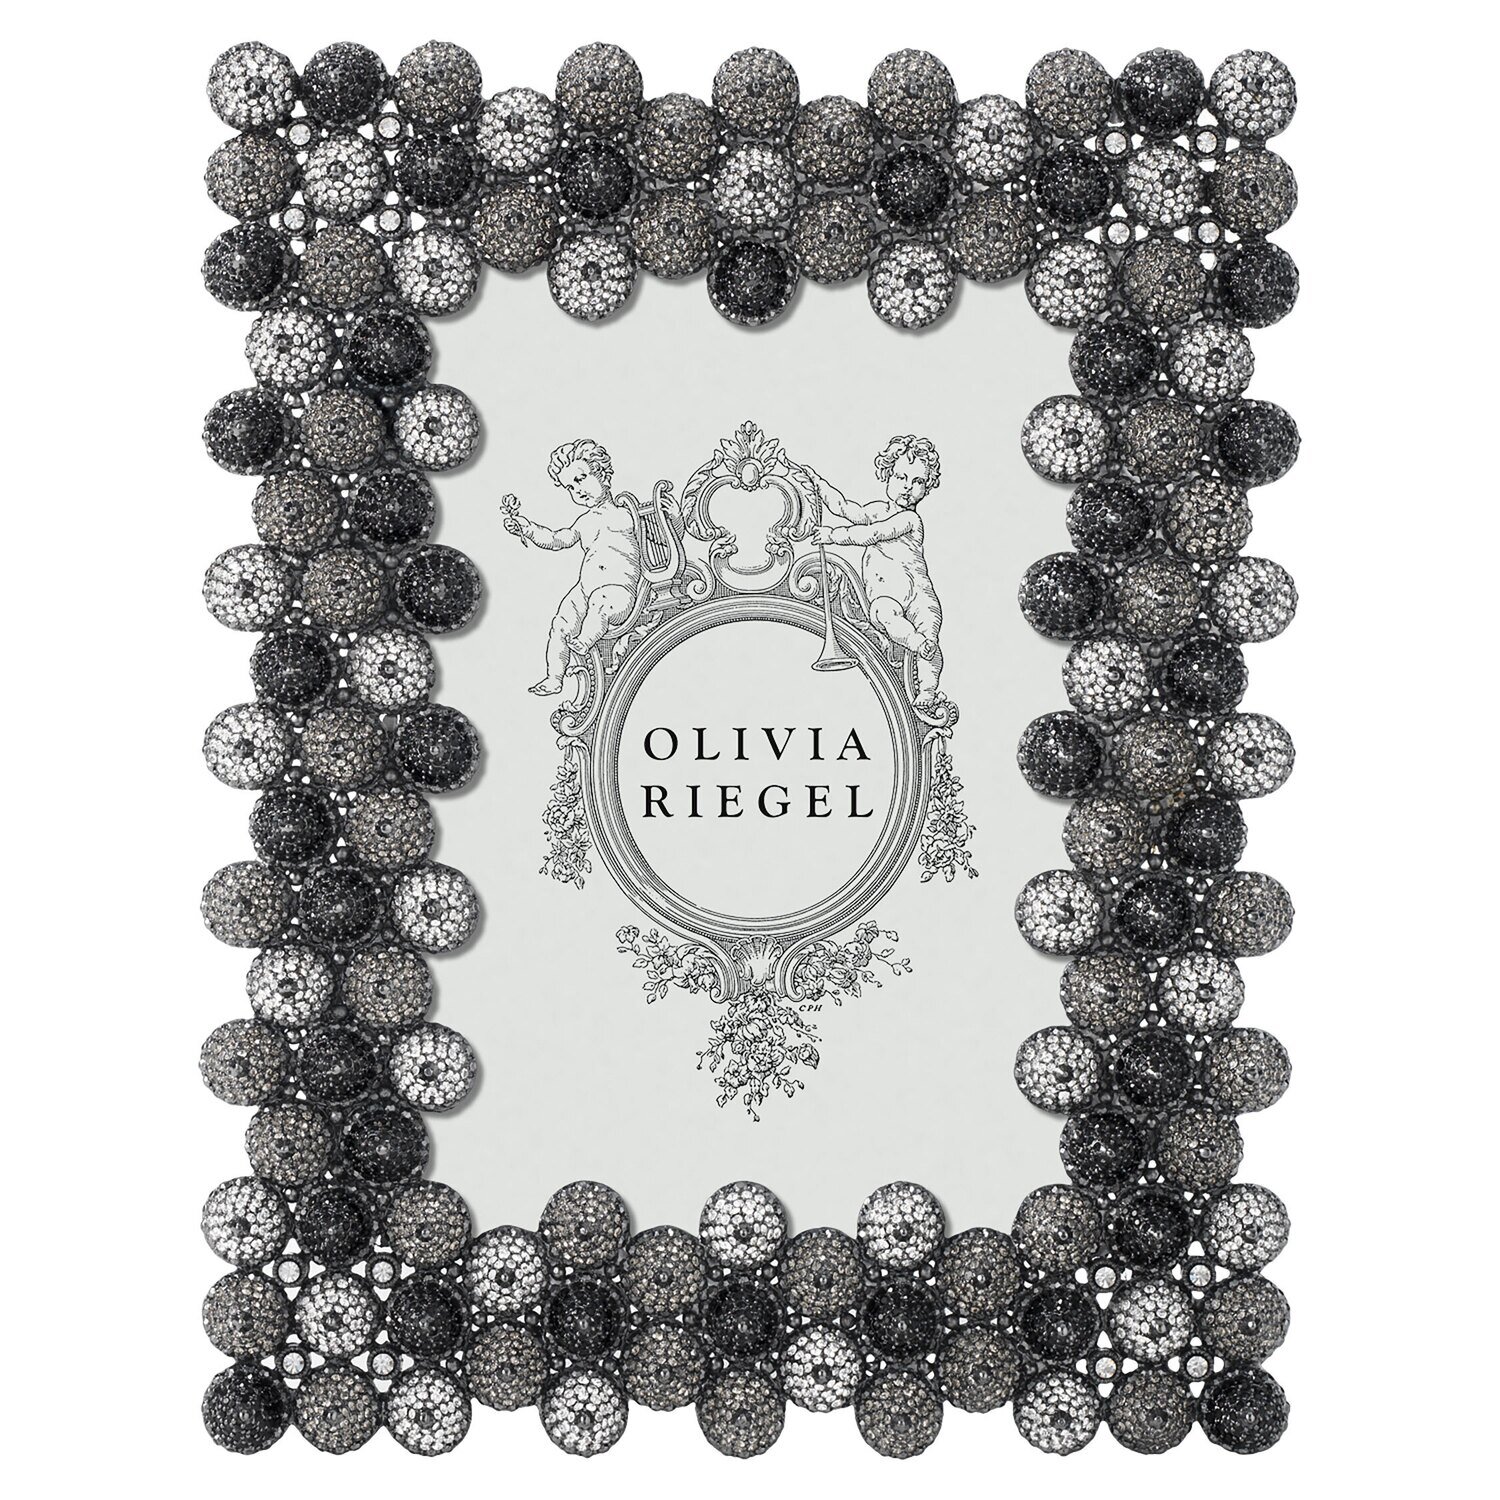 Olivia Riegel Marley 5 x 7 Inch Picture Frame RT0180